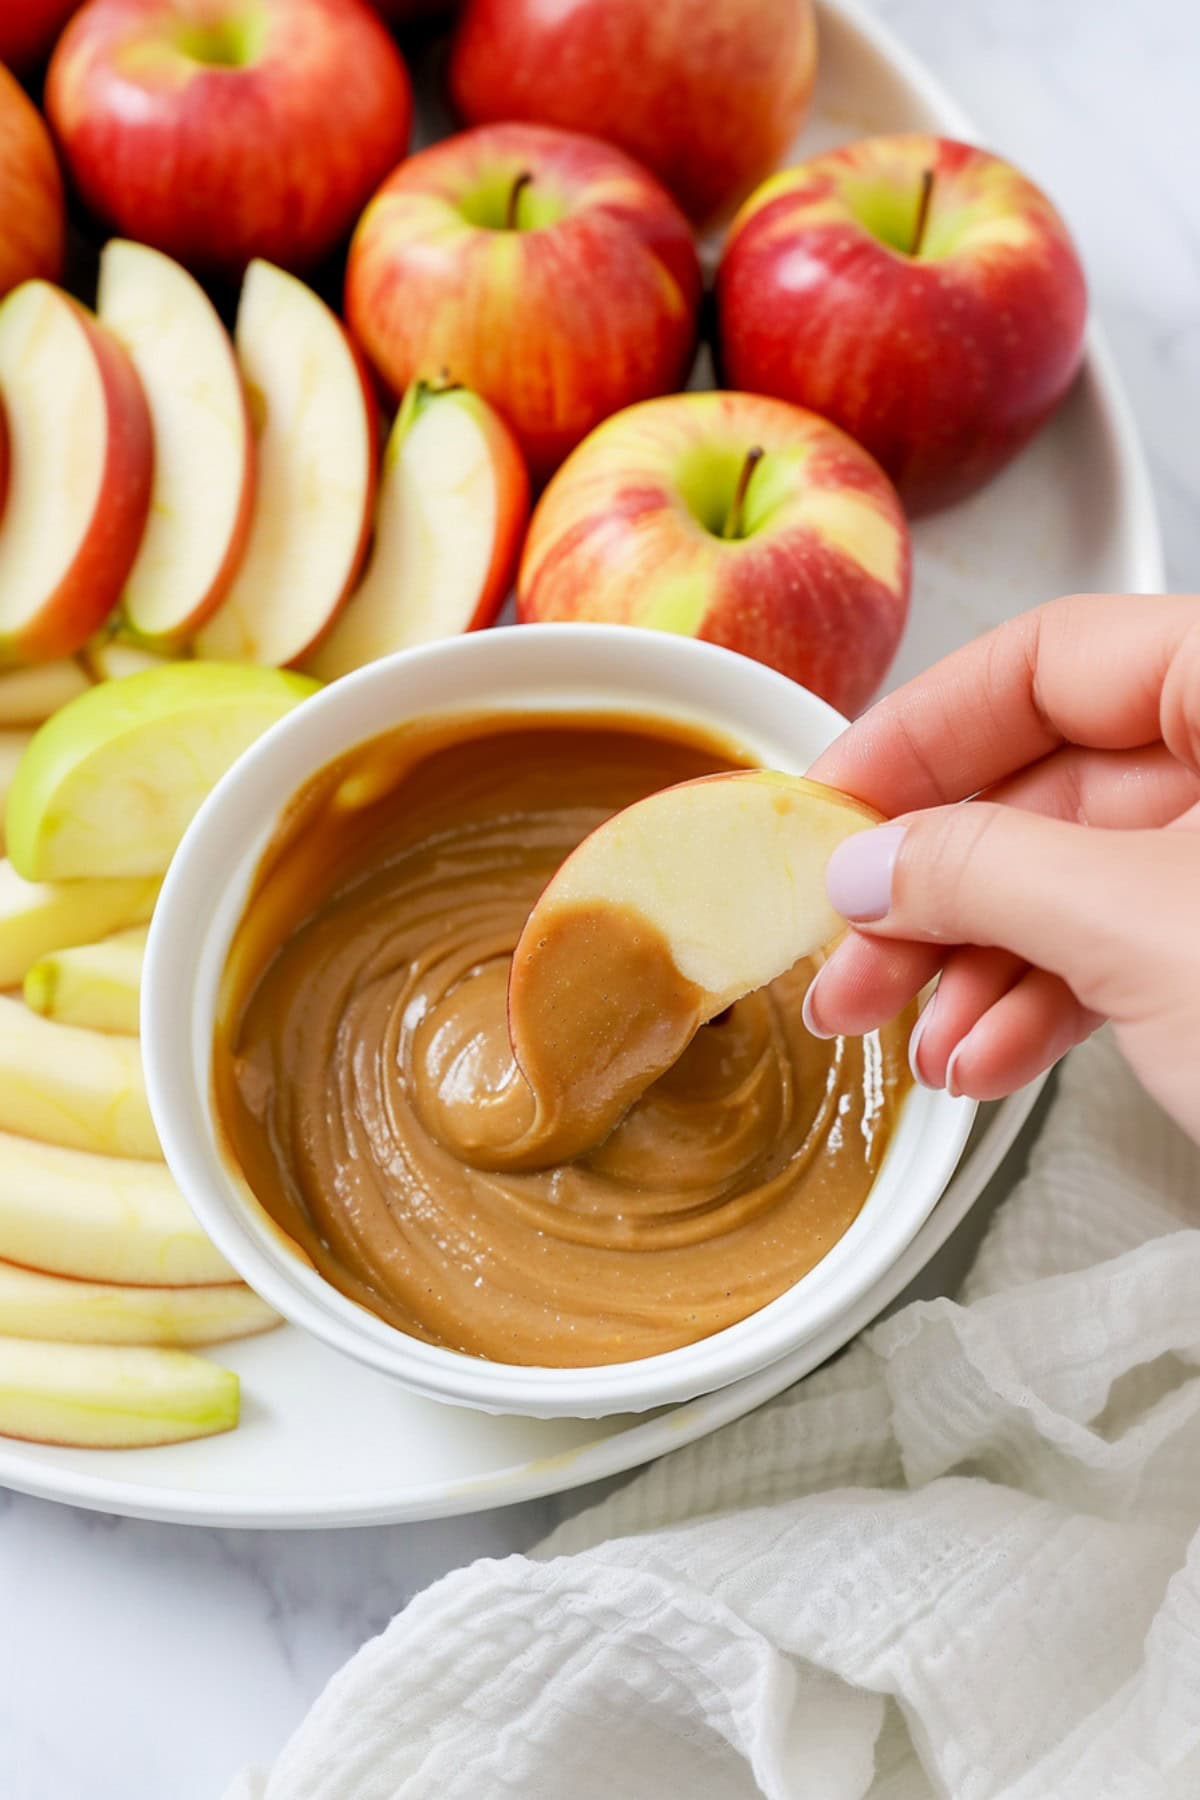 A hand dipping a slice of apple in a bowl of caramel dip on a white marble table